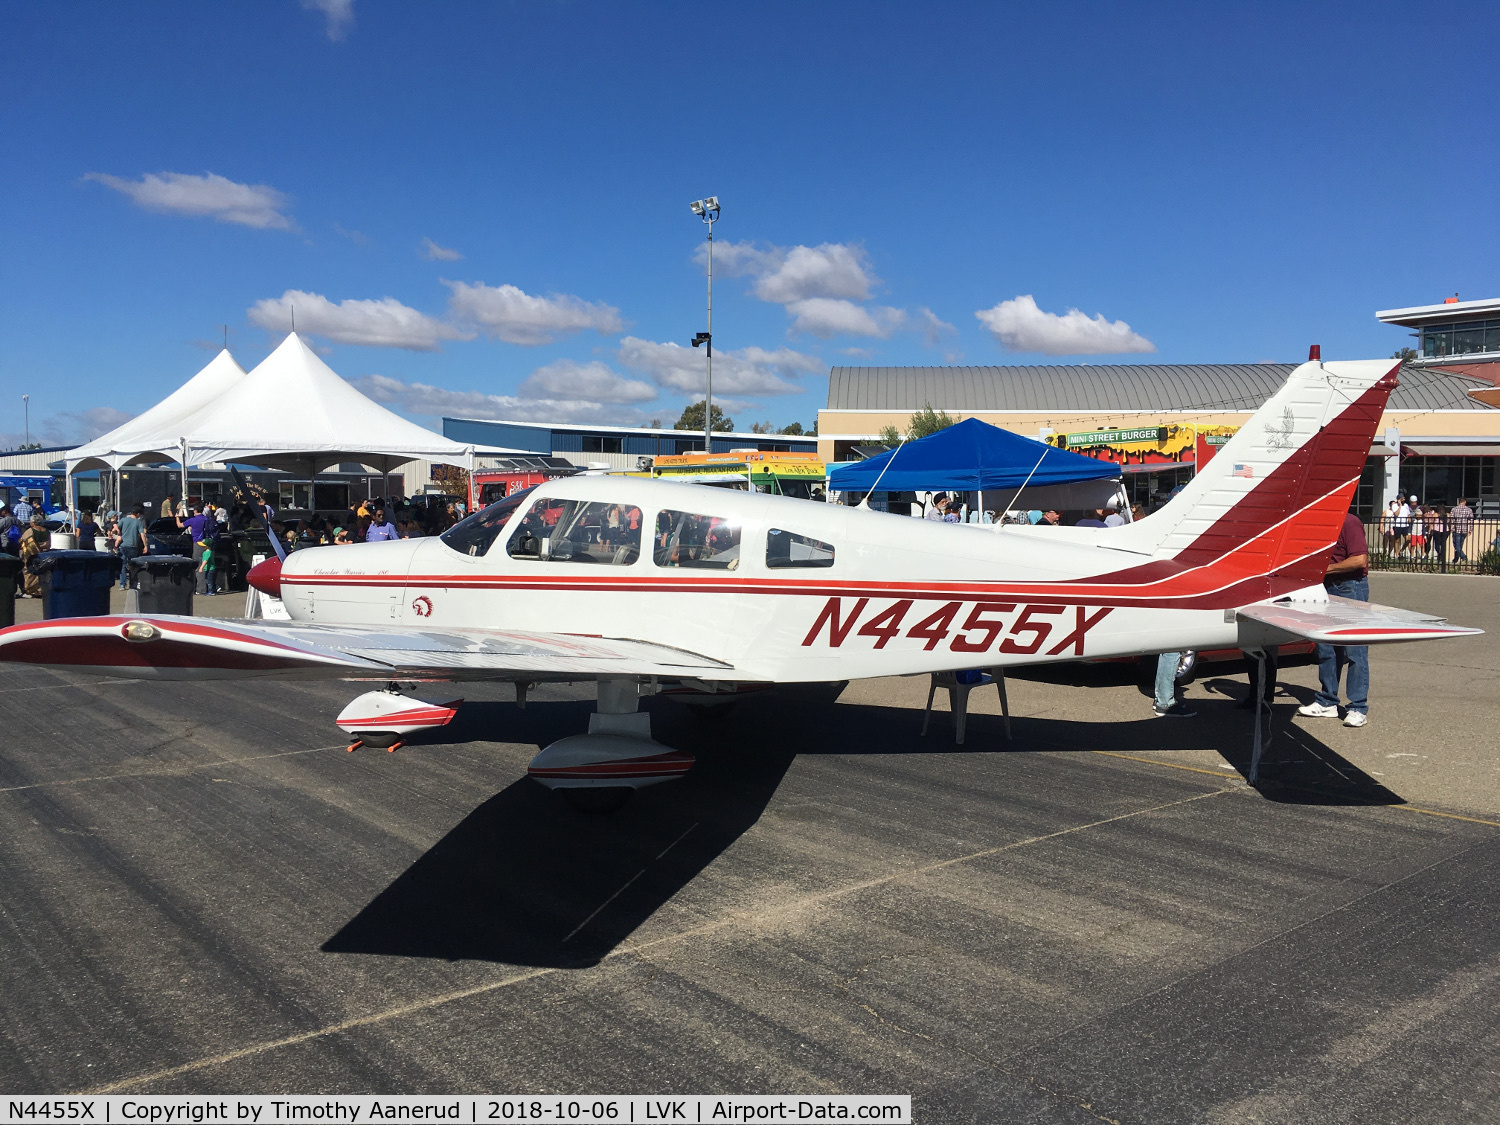 N4455X, 1975 Piper PA-28-151 C/N 28-7615013, 2018 Livermore Airport Open House, 1975 Piper PA-28-151, c/n: 28-7615013